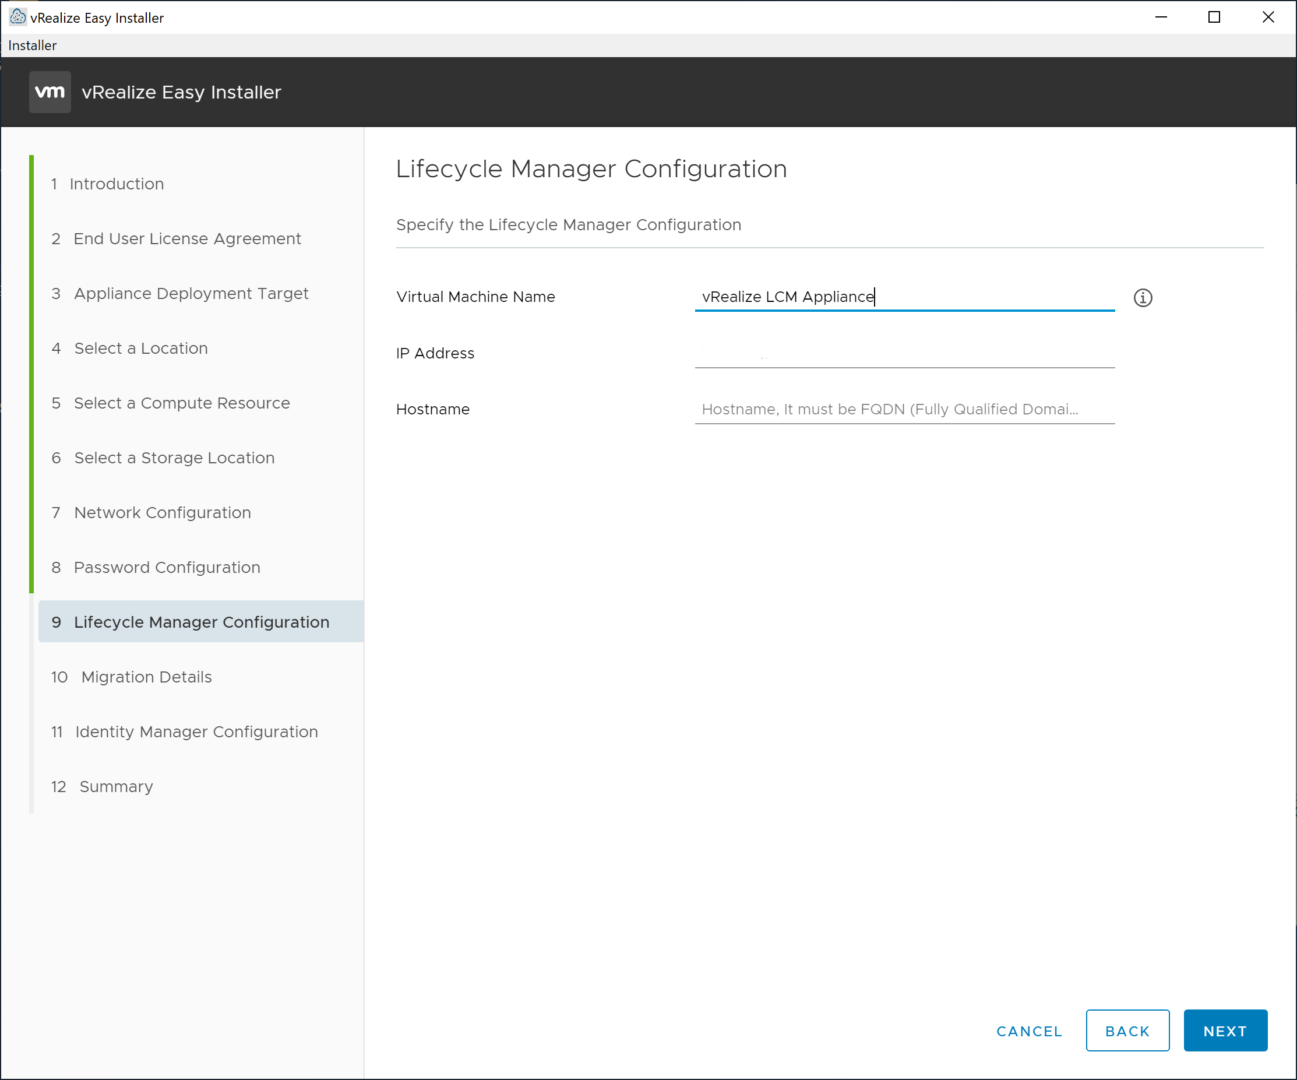 vRealize Easy Installer - Migrate - Lifecycle Manager Configuration